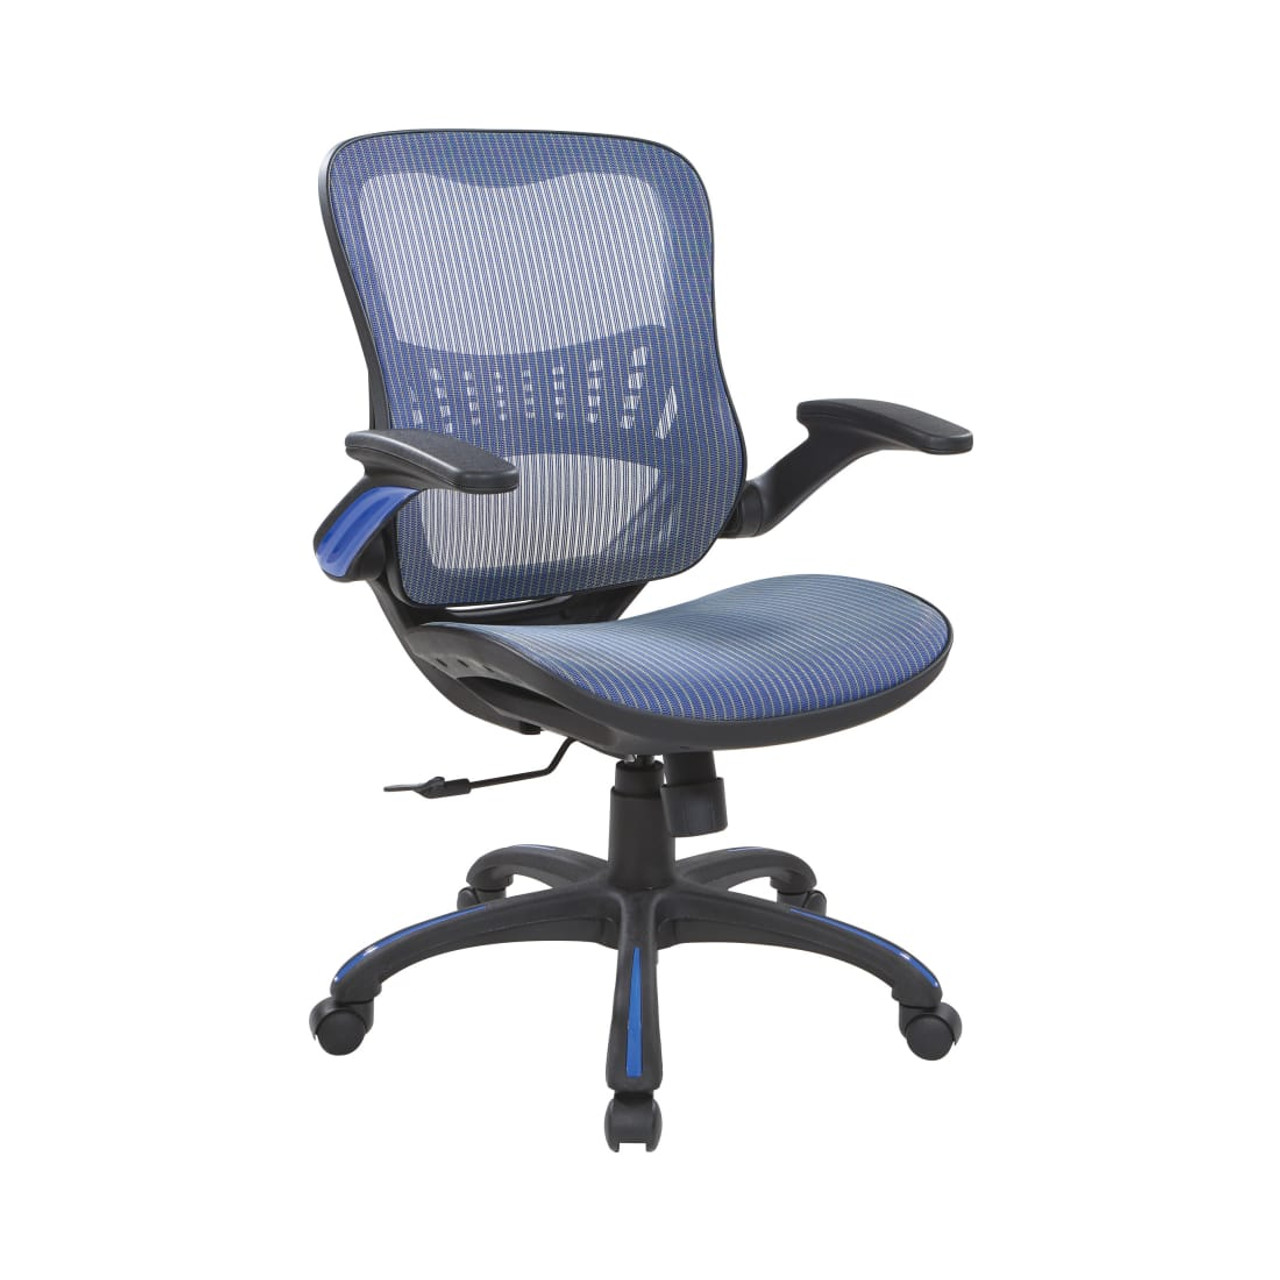 Mesh Seat and Back Manager’s Chair in Blue Mesh